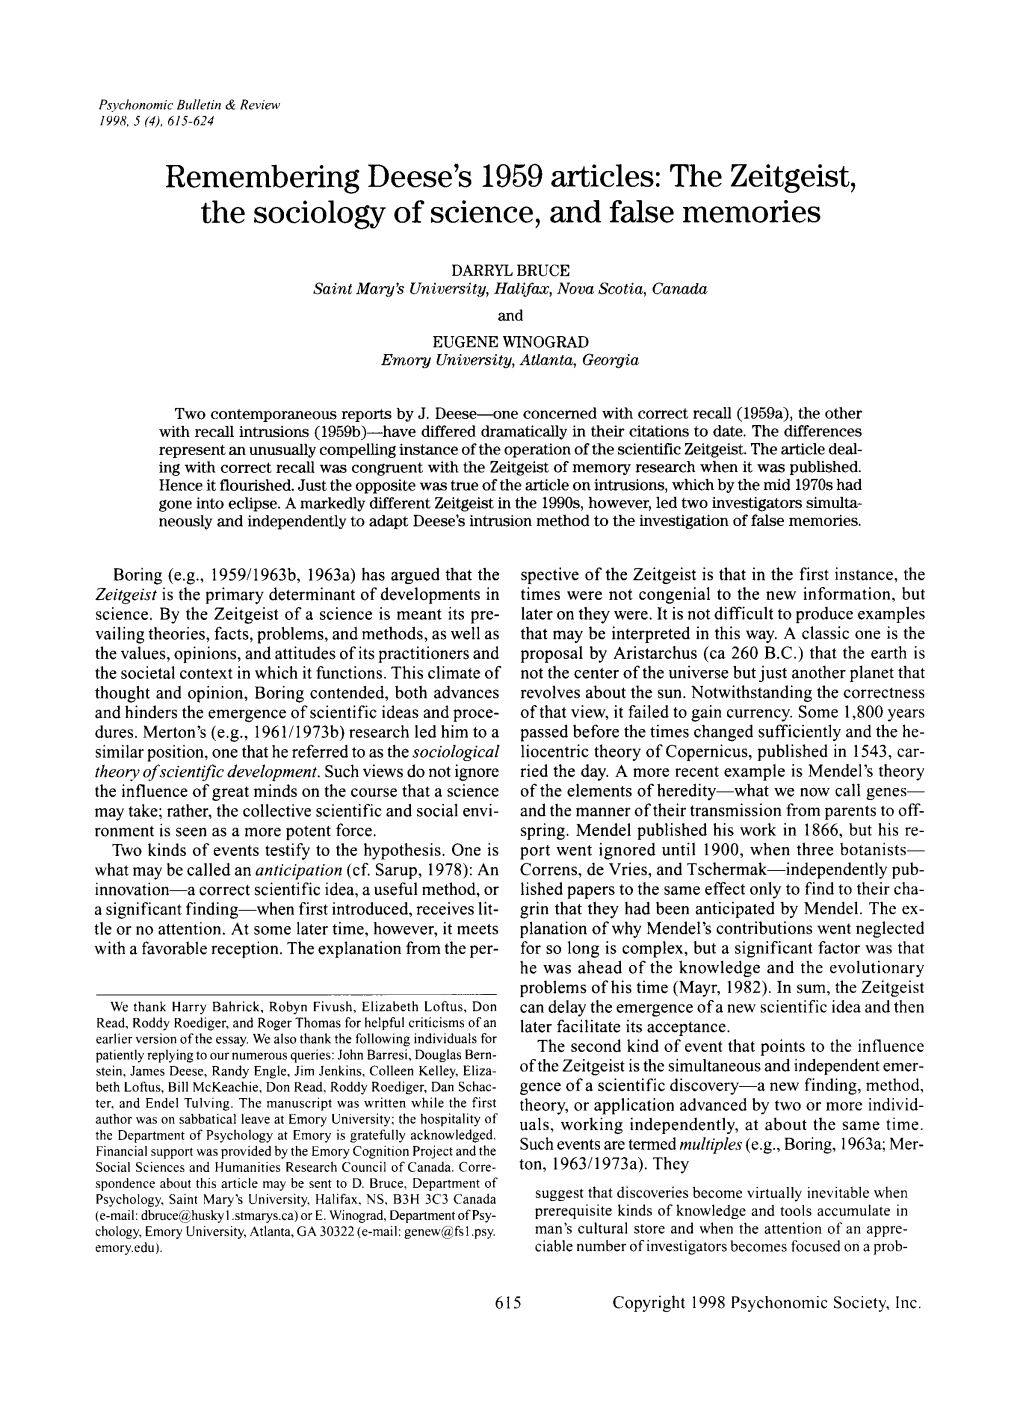 S 1959 Articles: the Zeitgeist, the Sociology of Science, and False Memories